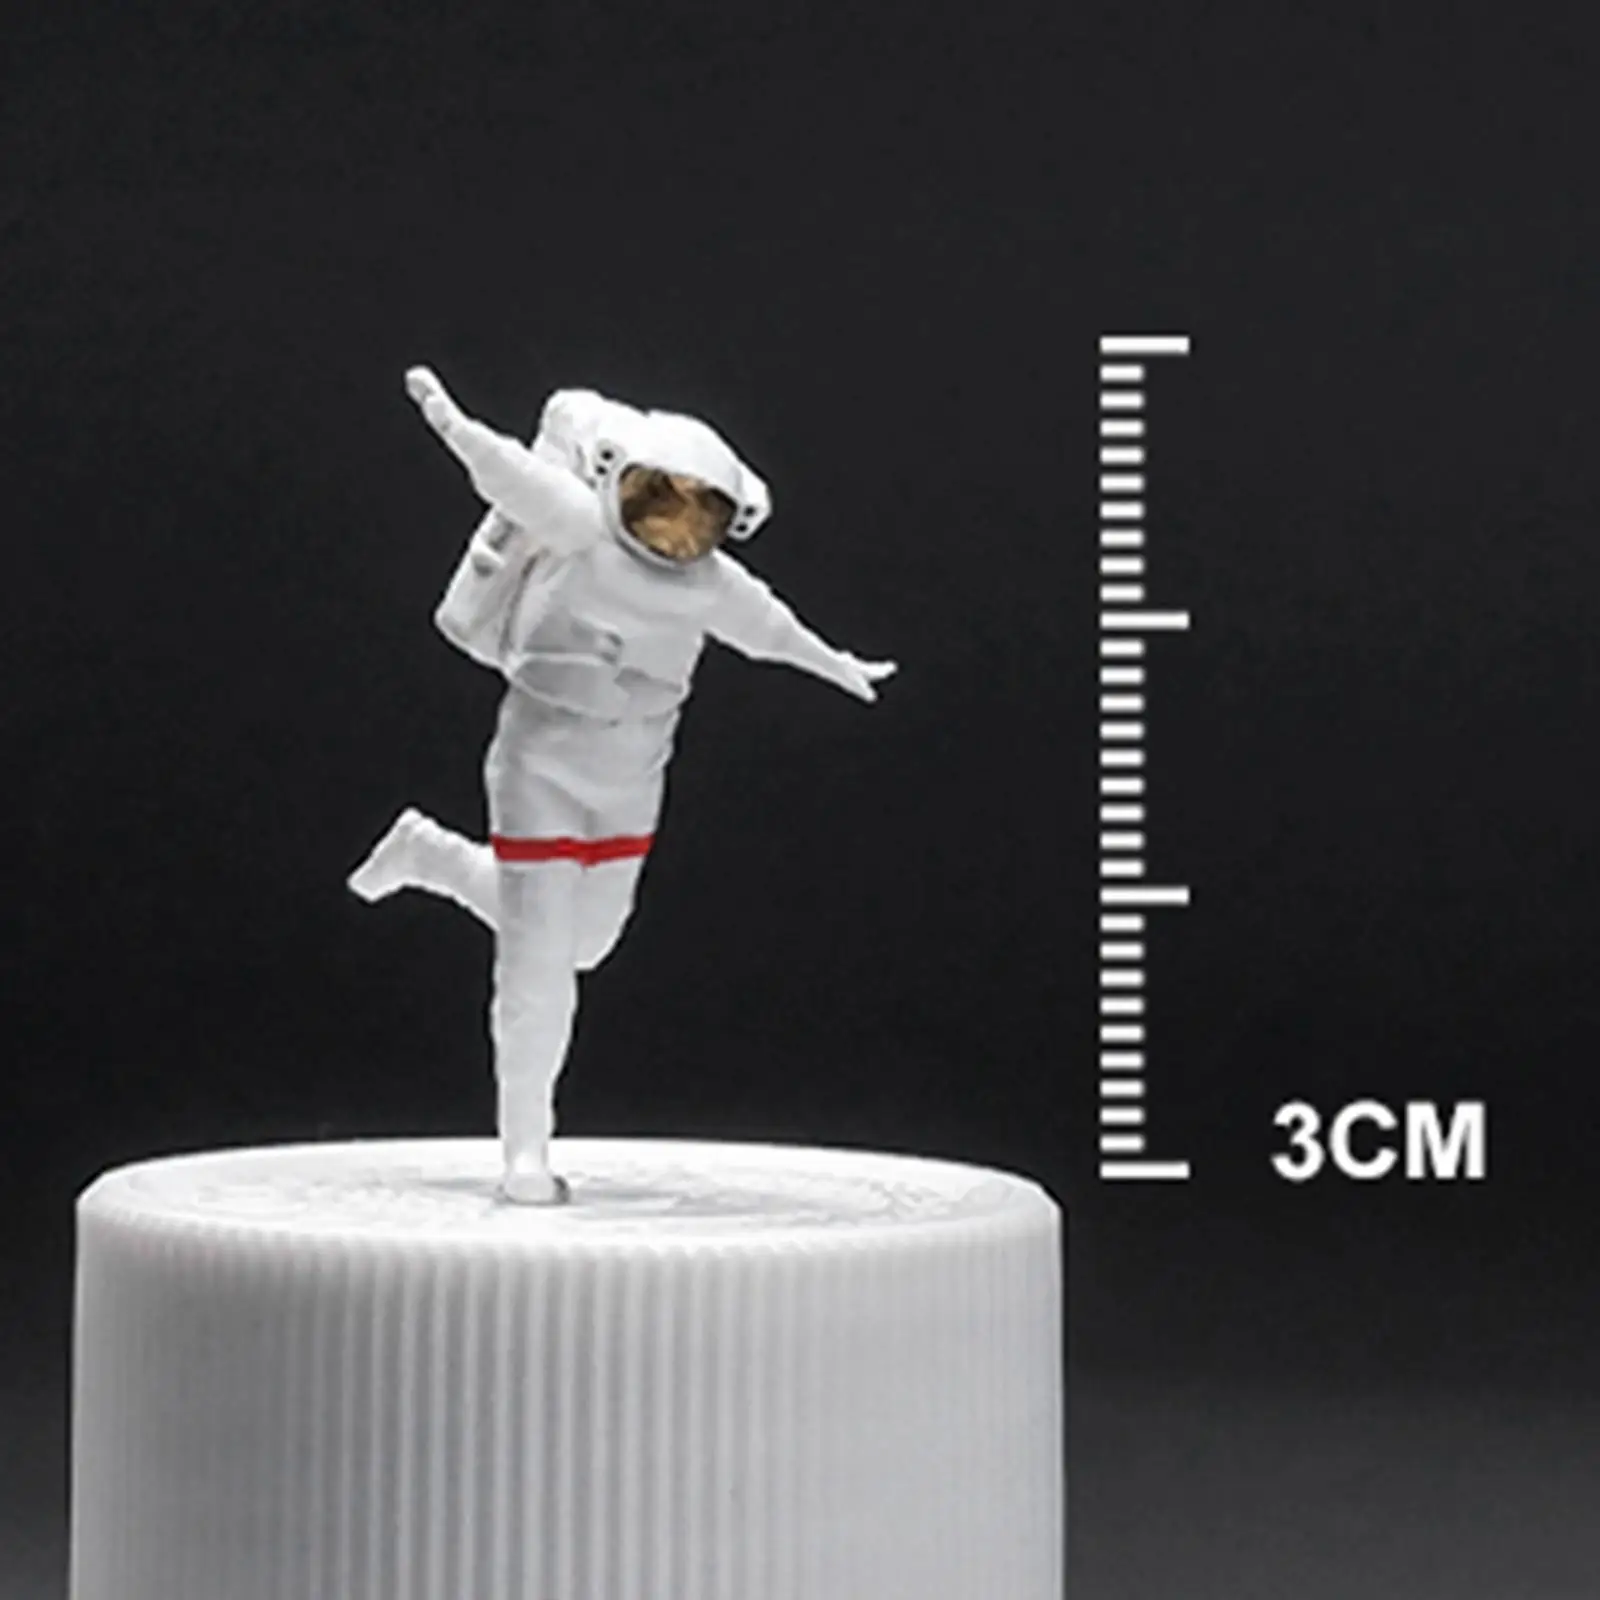 1:64 Scale Spaceman Figure Astronaut Collections Layout Accessories S Scale